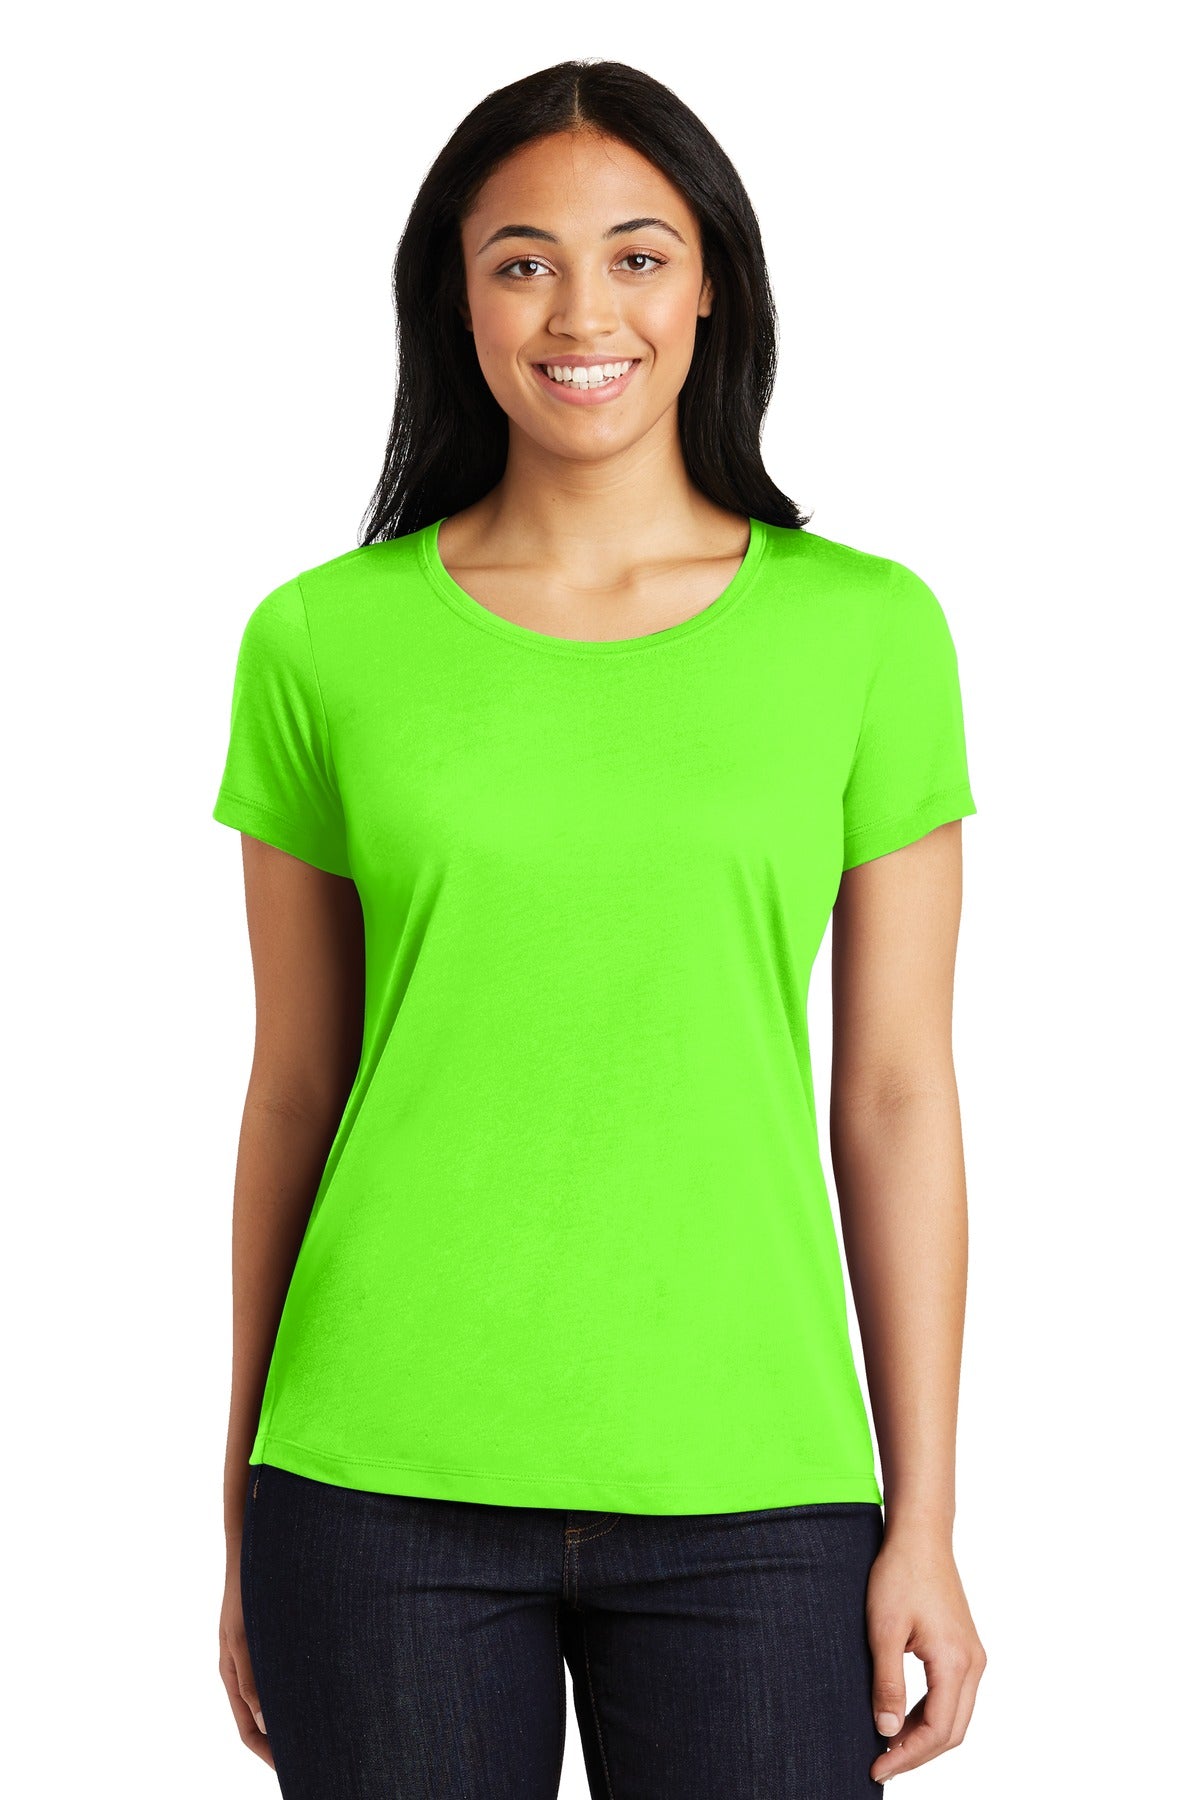 Sport-Tek® Ladies PosiCharge® Competitor™ Cotton Touch™ Scoop Neck Tee. LST450 - DFW Impression